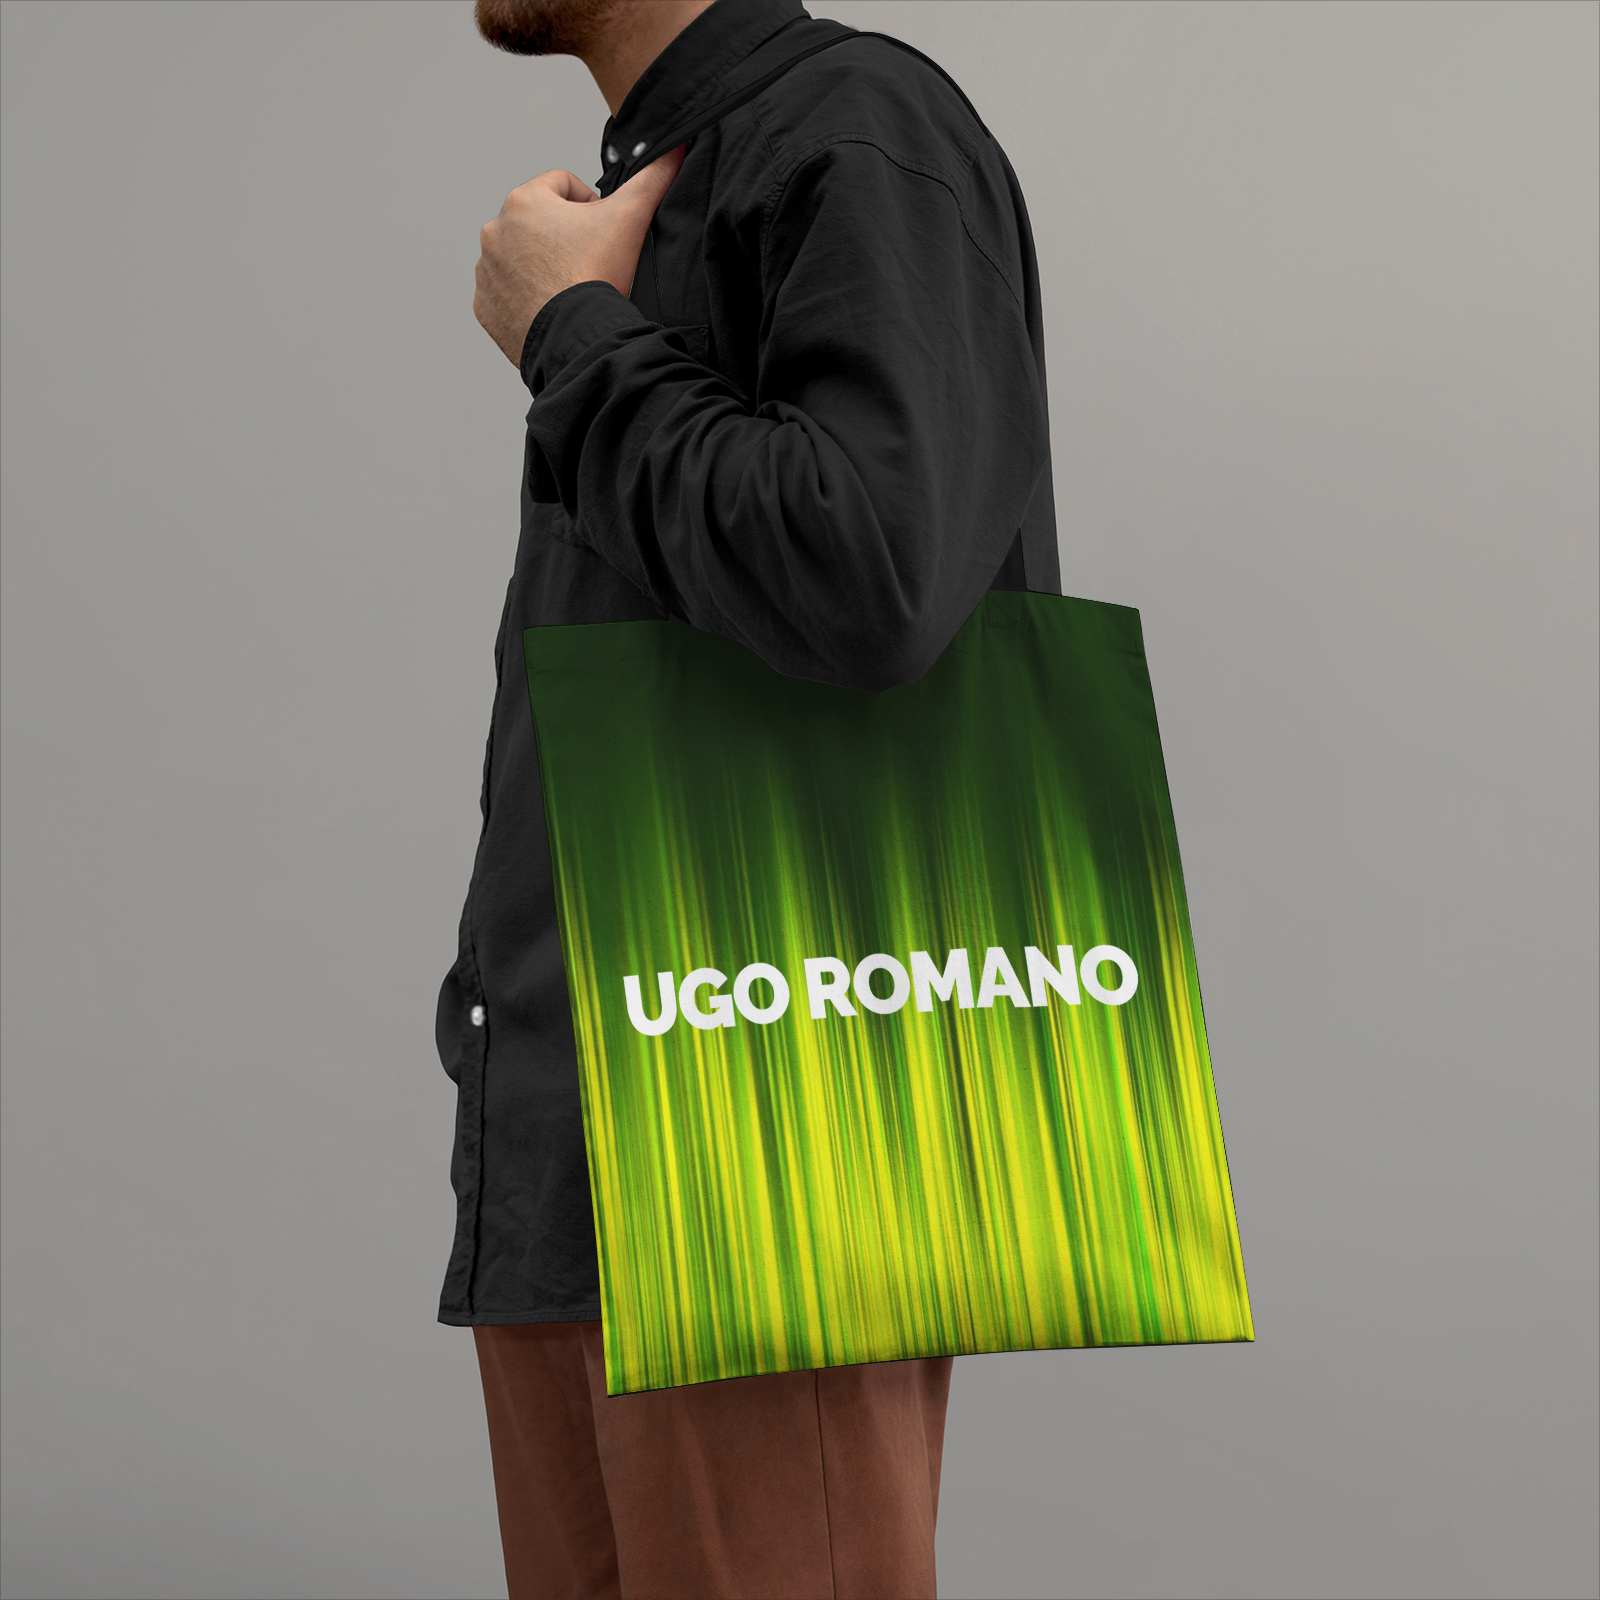 Heavy Duty and Strong Natural Cotton Canvas Tote Bag - UGO ROMANO URTB068